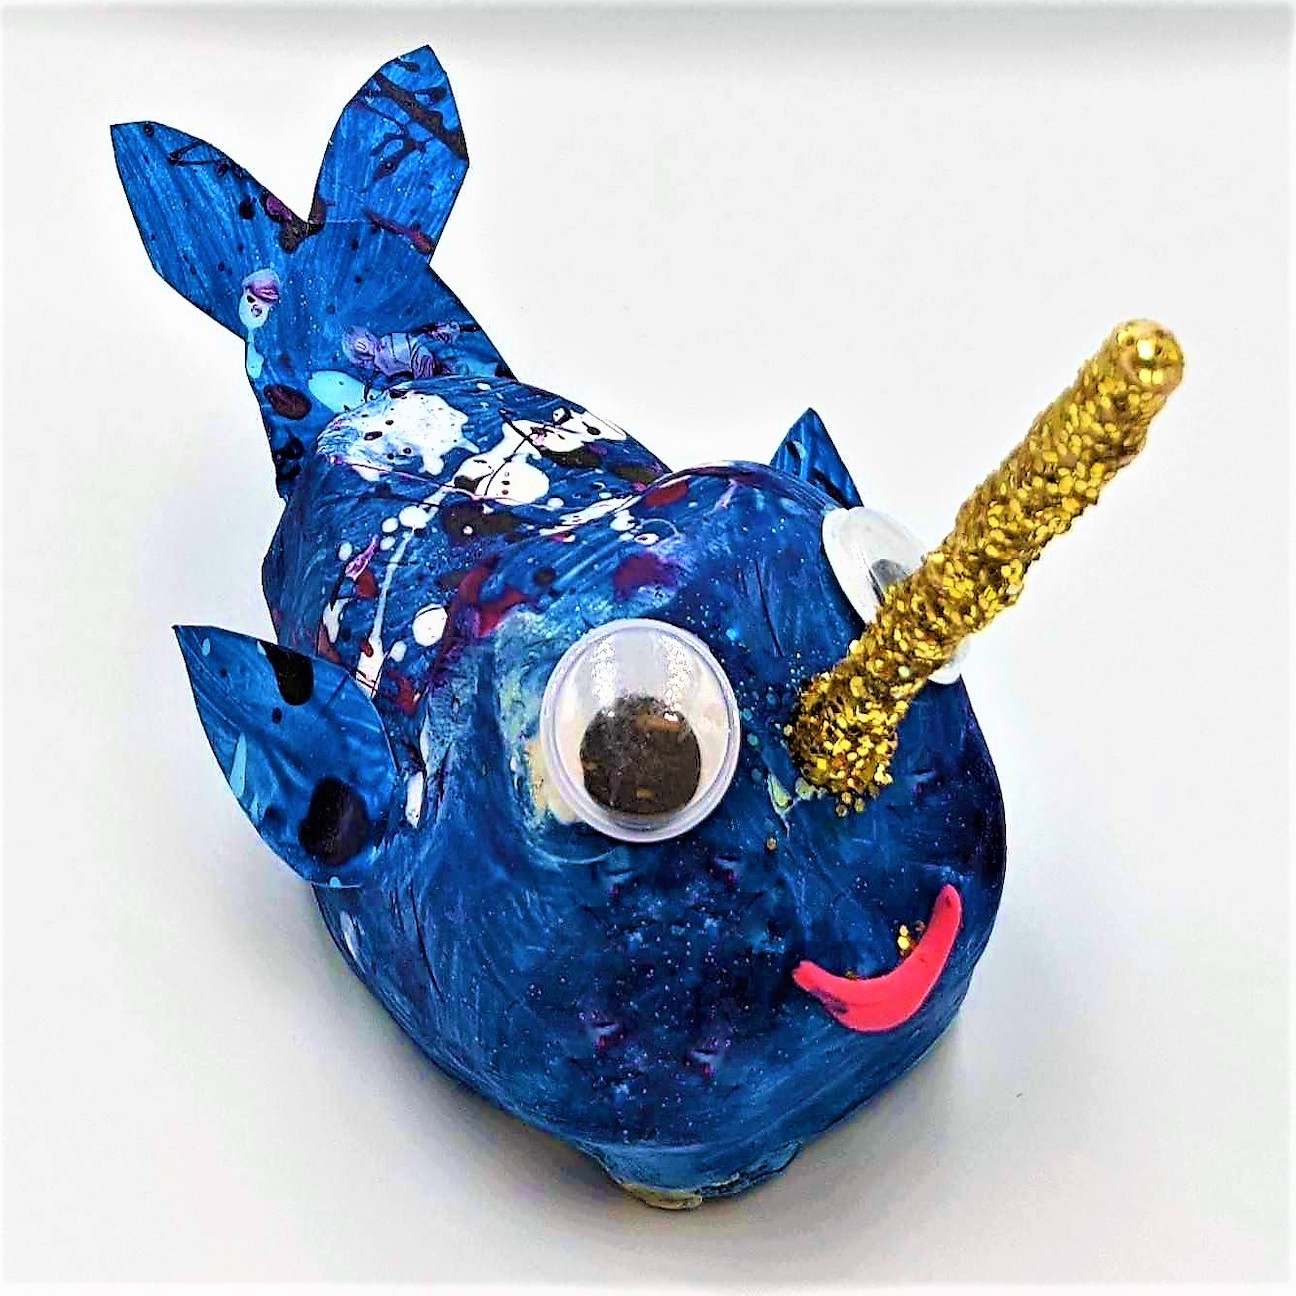 Kidcreate Mobile Studio - Aliso Viejo, Nifty Narwhal Art Project